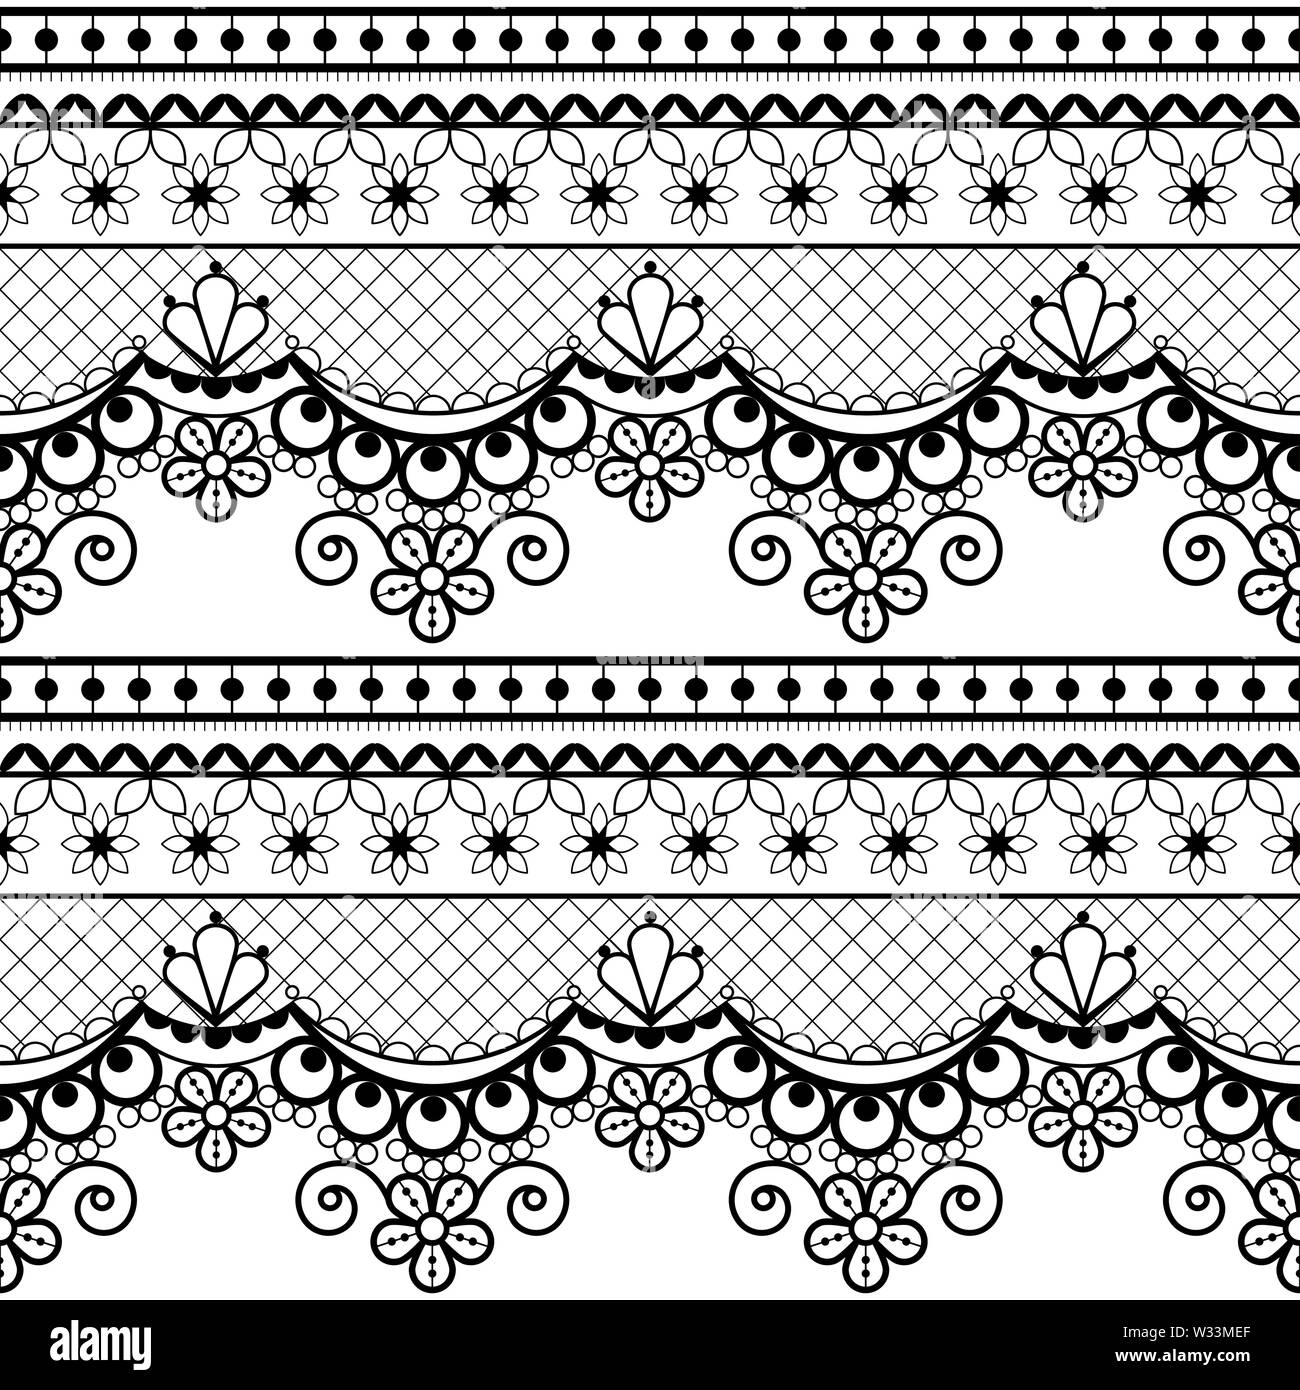 Wedding lace French or English seamless pattern set, black ornamental repetitive design with flowers - textile design Stock Vector